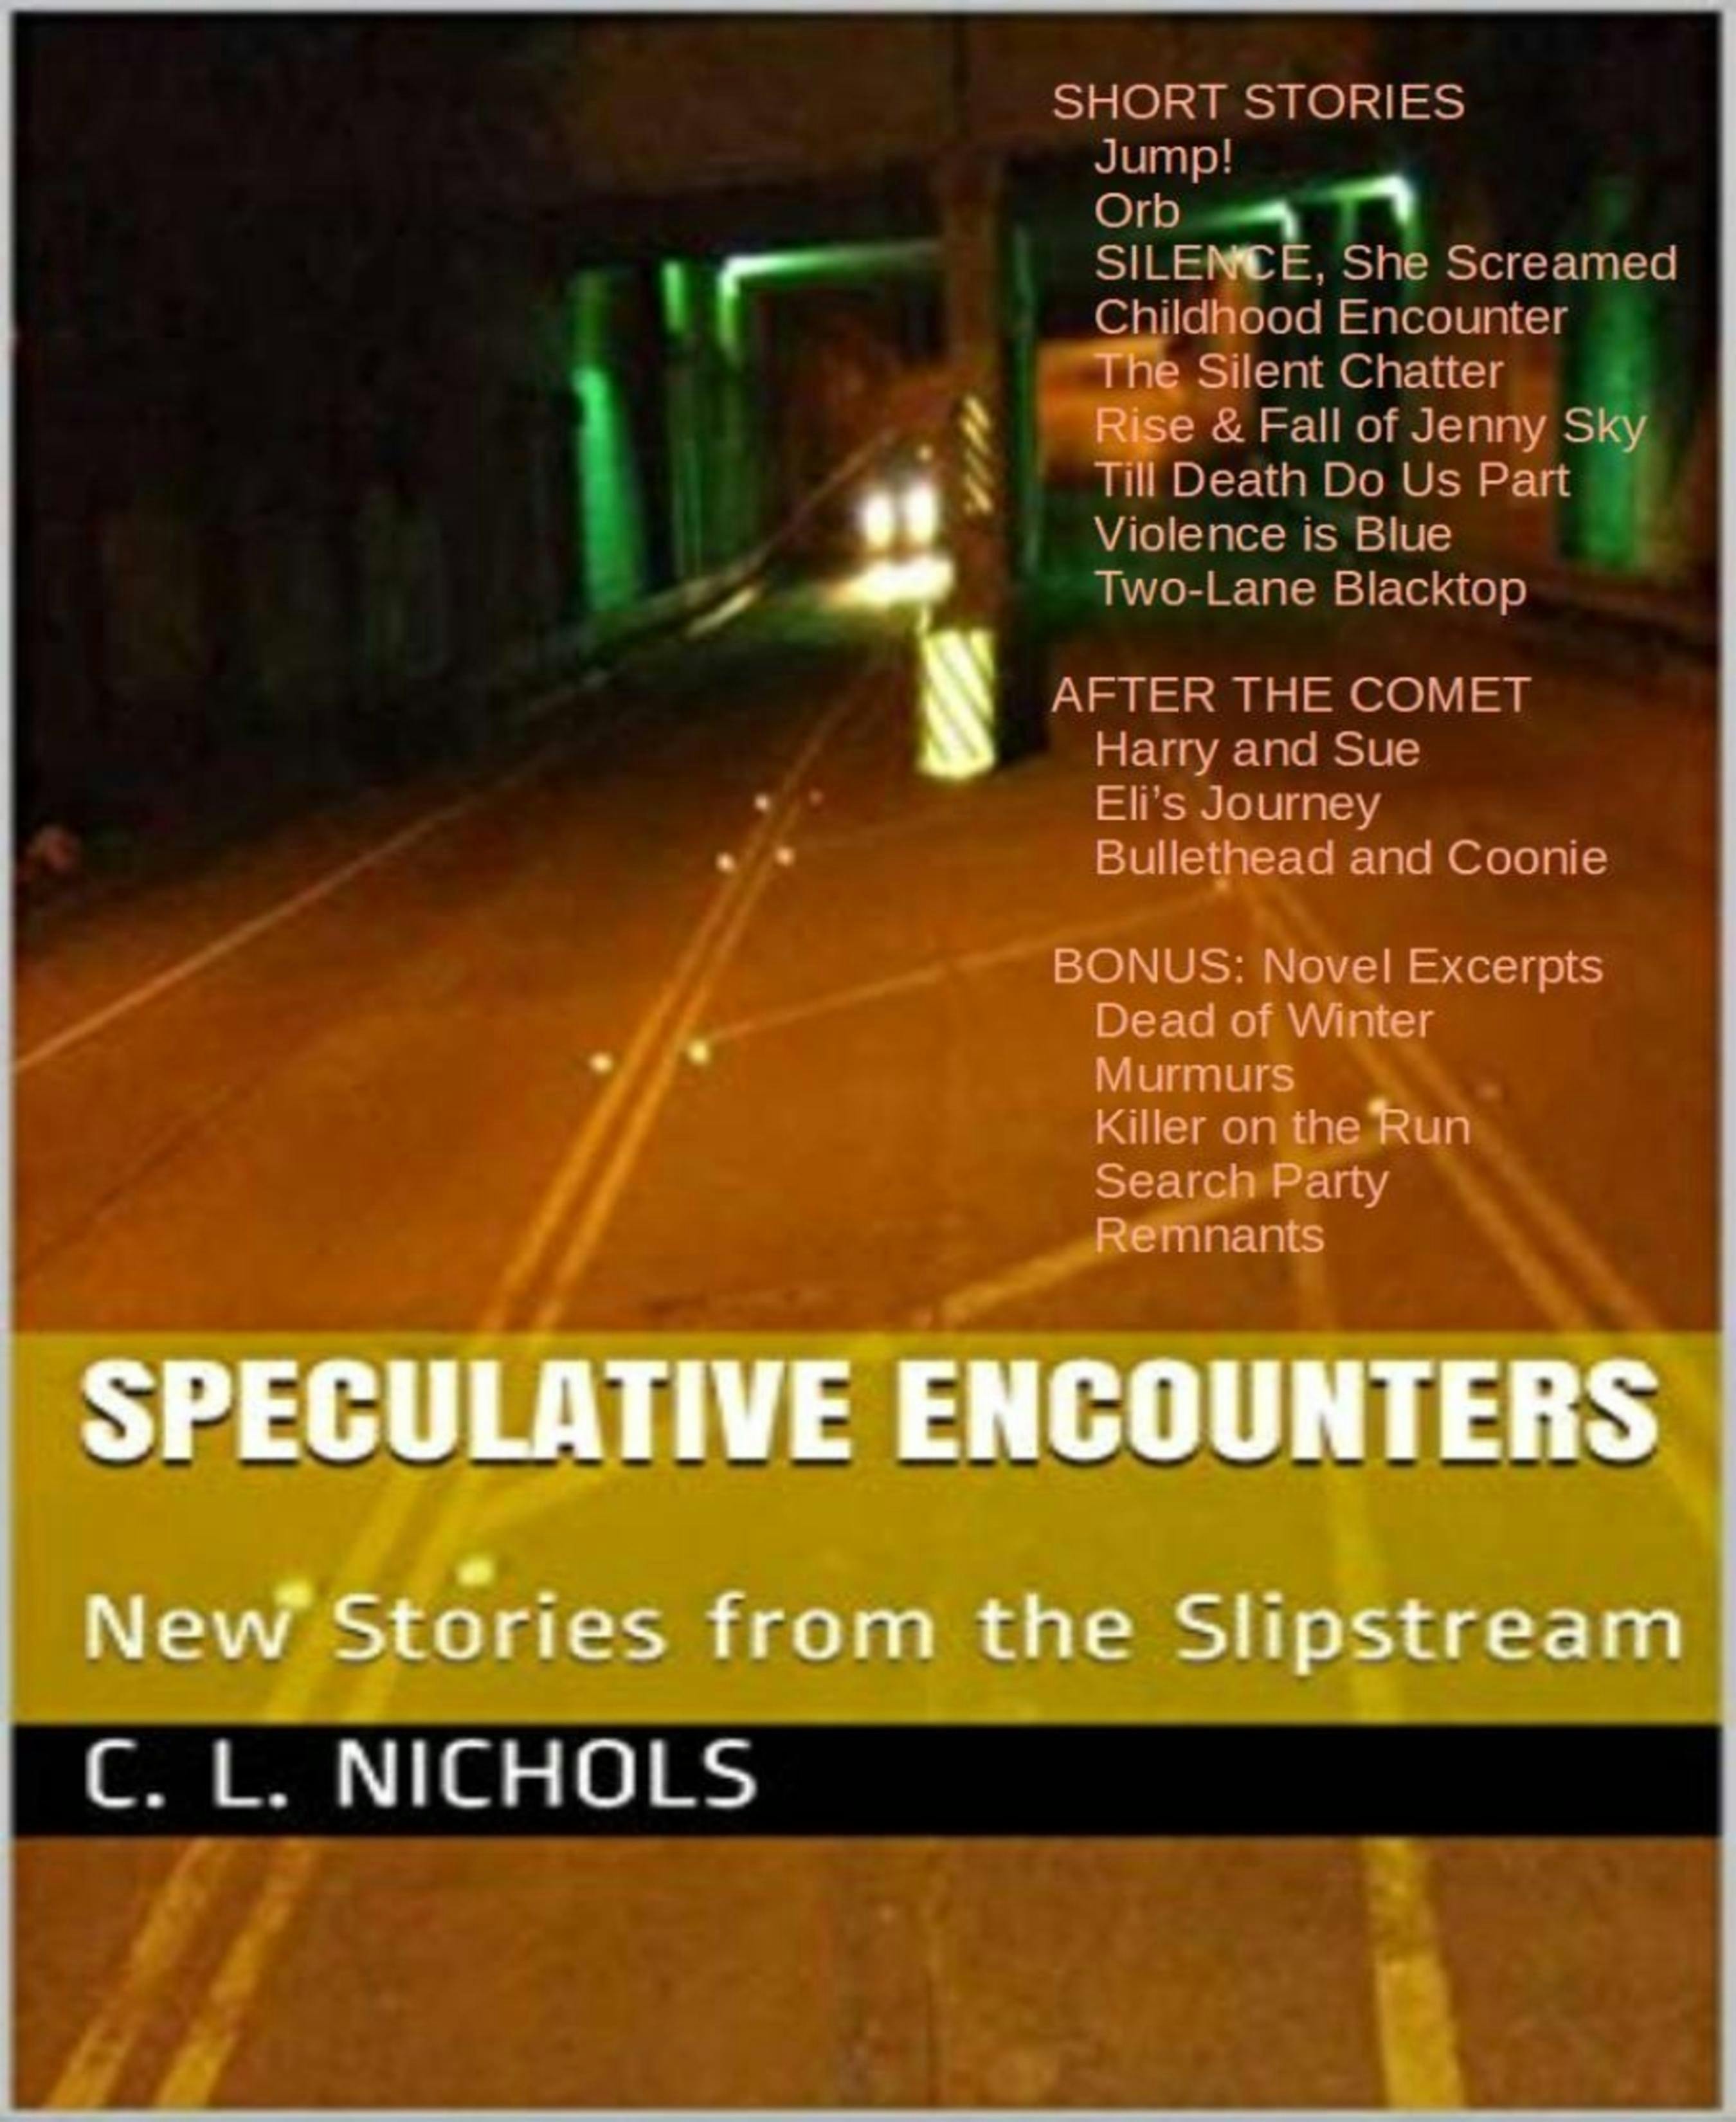 Speculative Encounters: New Stories from the Slipstream - C. L. Nichols